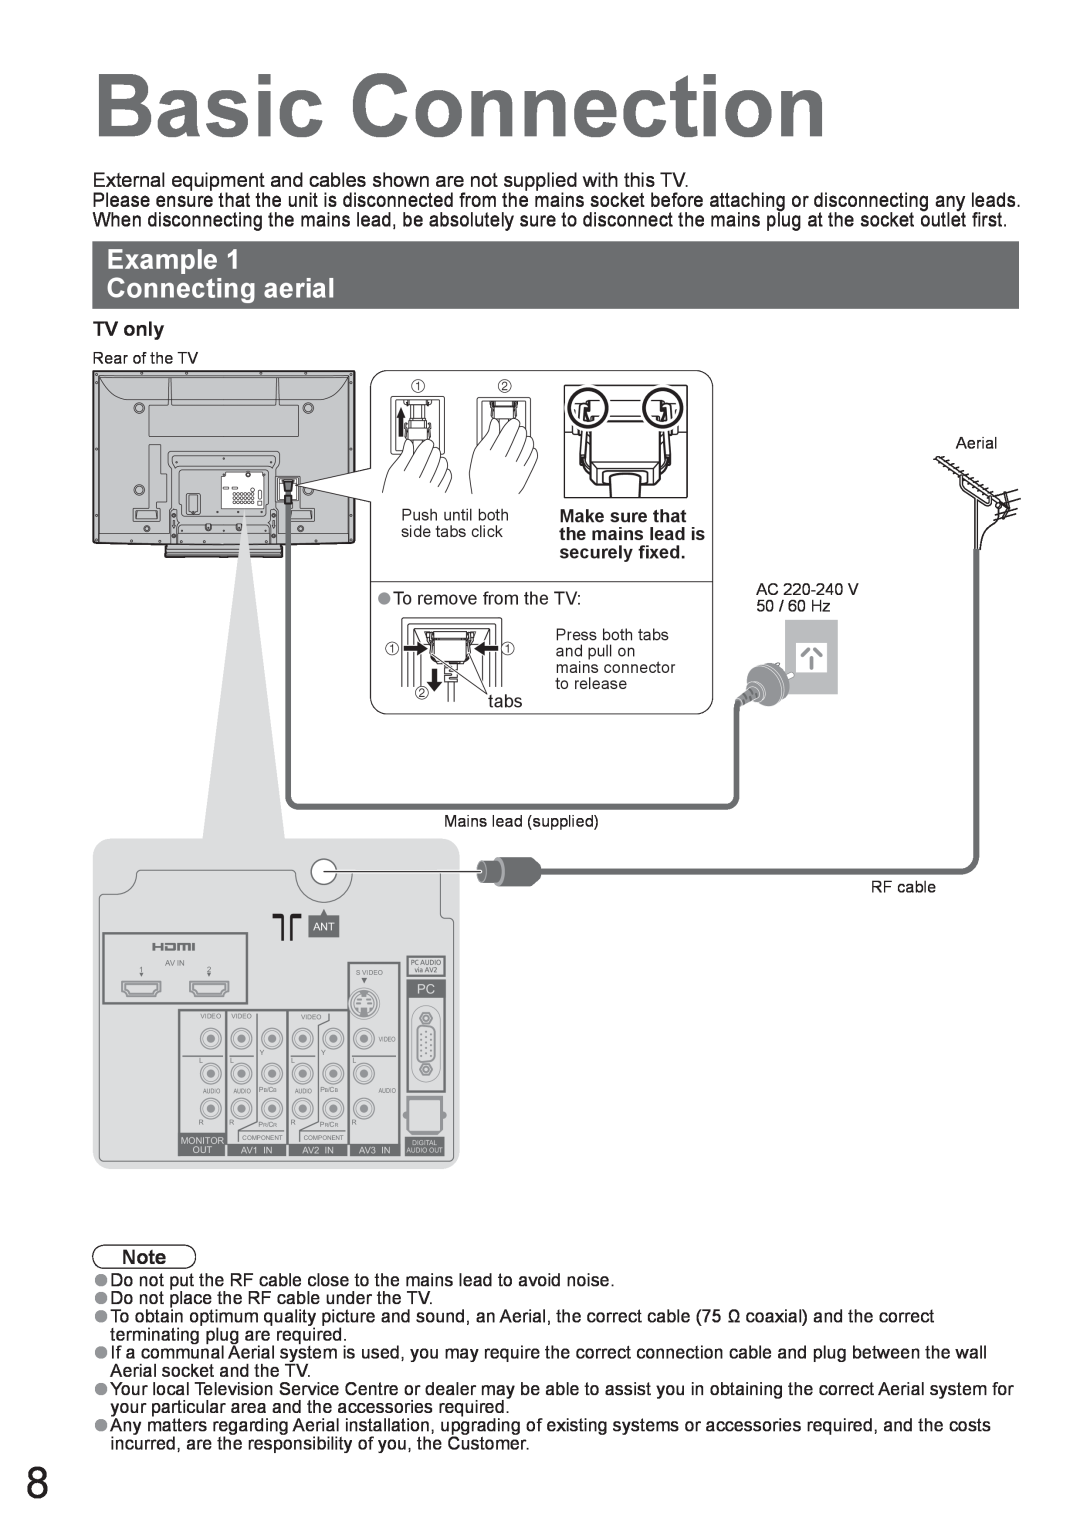 Panasonic TH-42PX8A manual Basic Connection, Example Connecting aerial, TV only, Make sure that, securely ﬁxed 